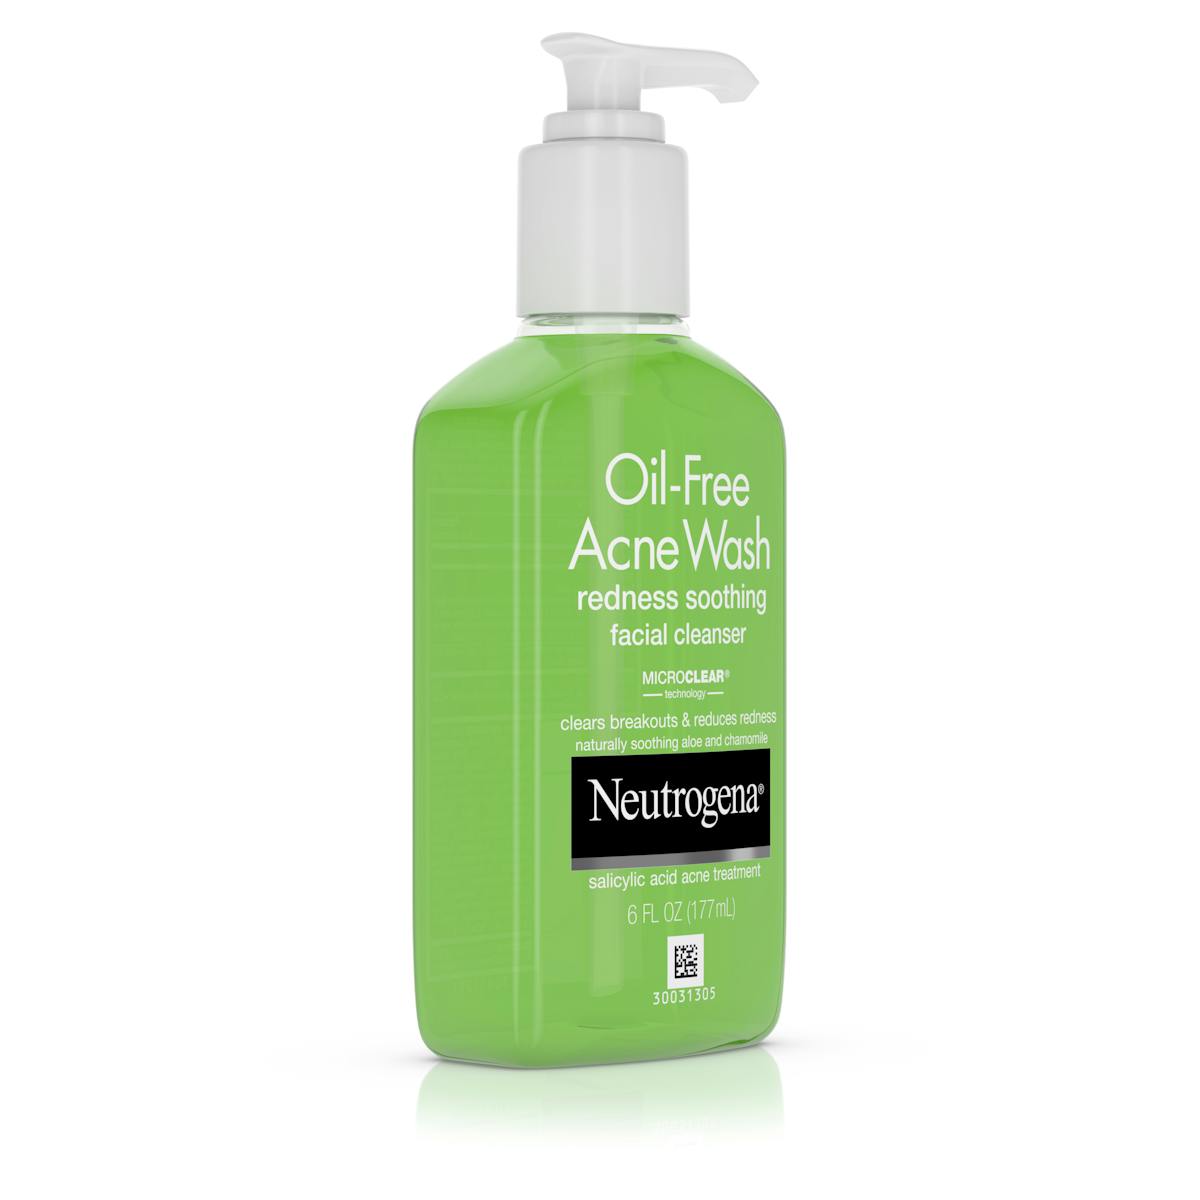 OilFree Acne Face Wash Redness Soothing Facial Cleanser